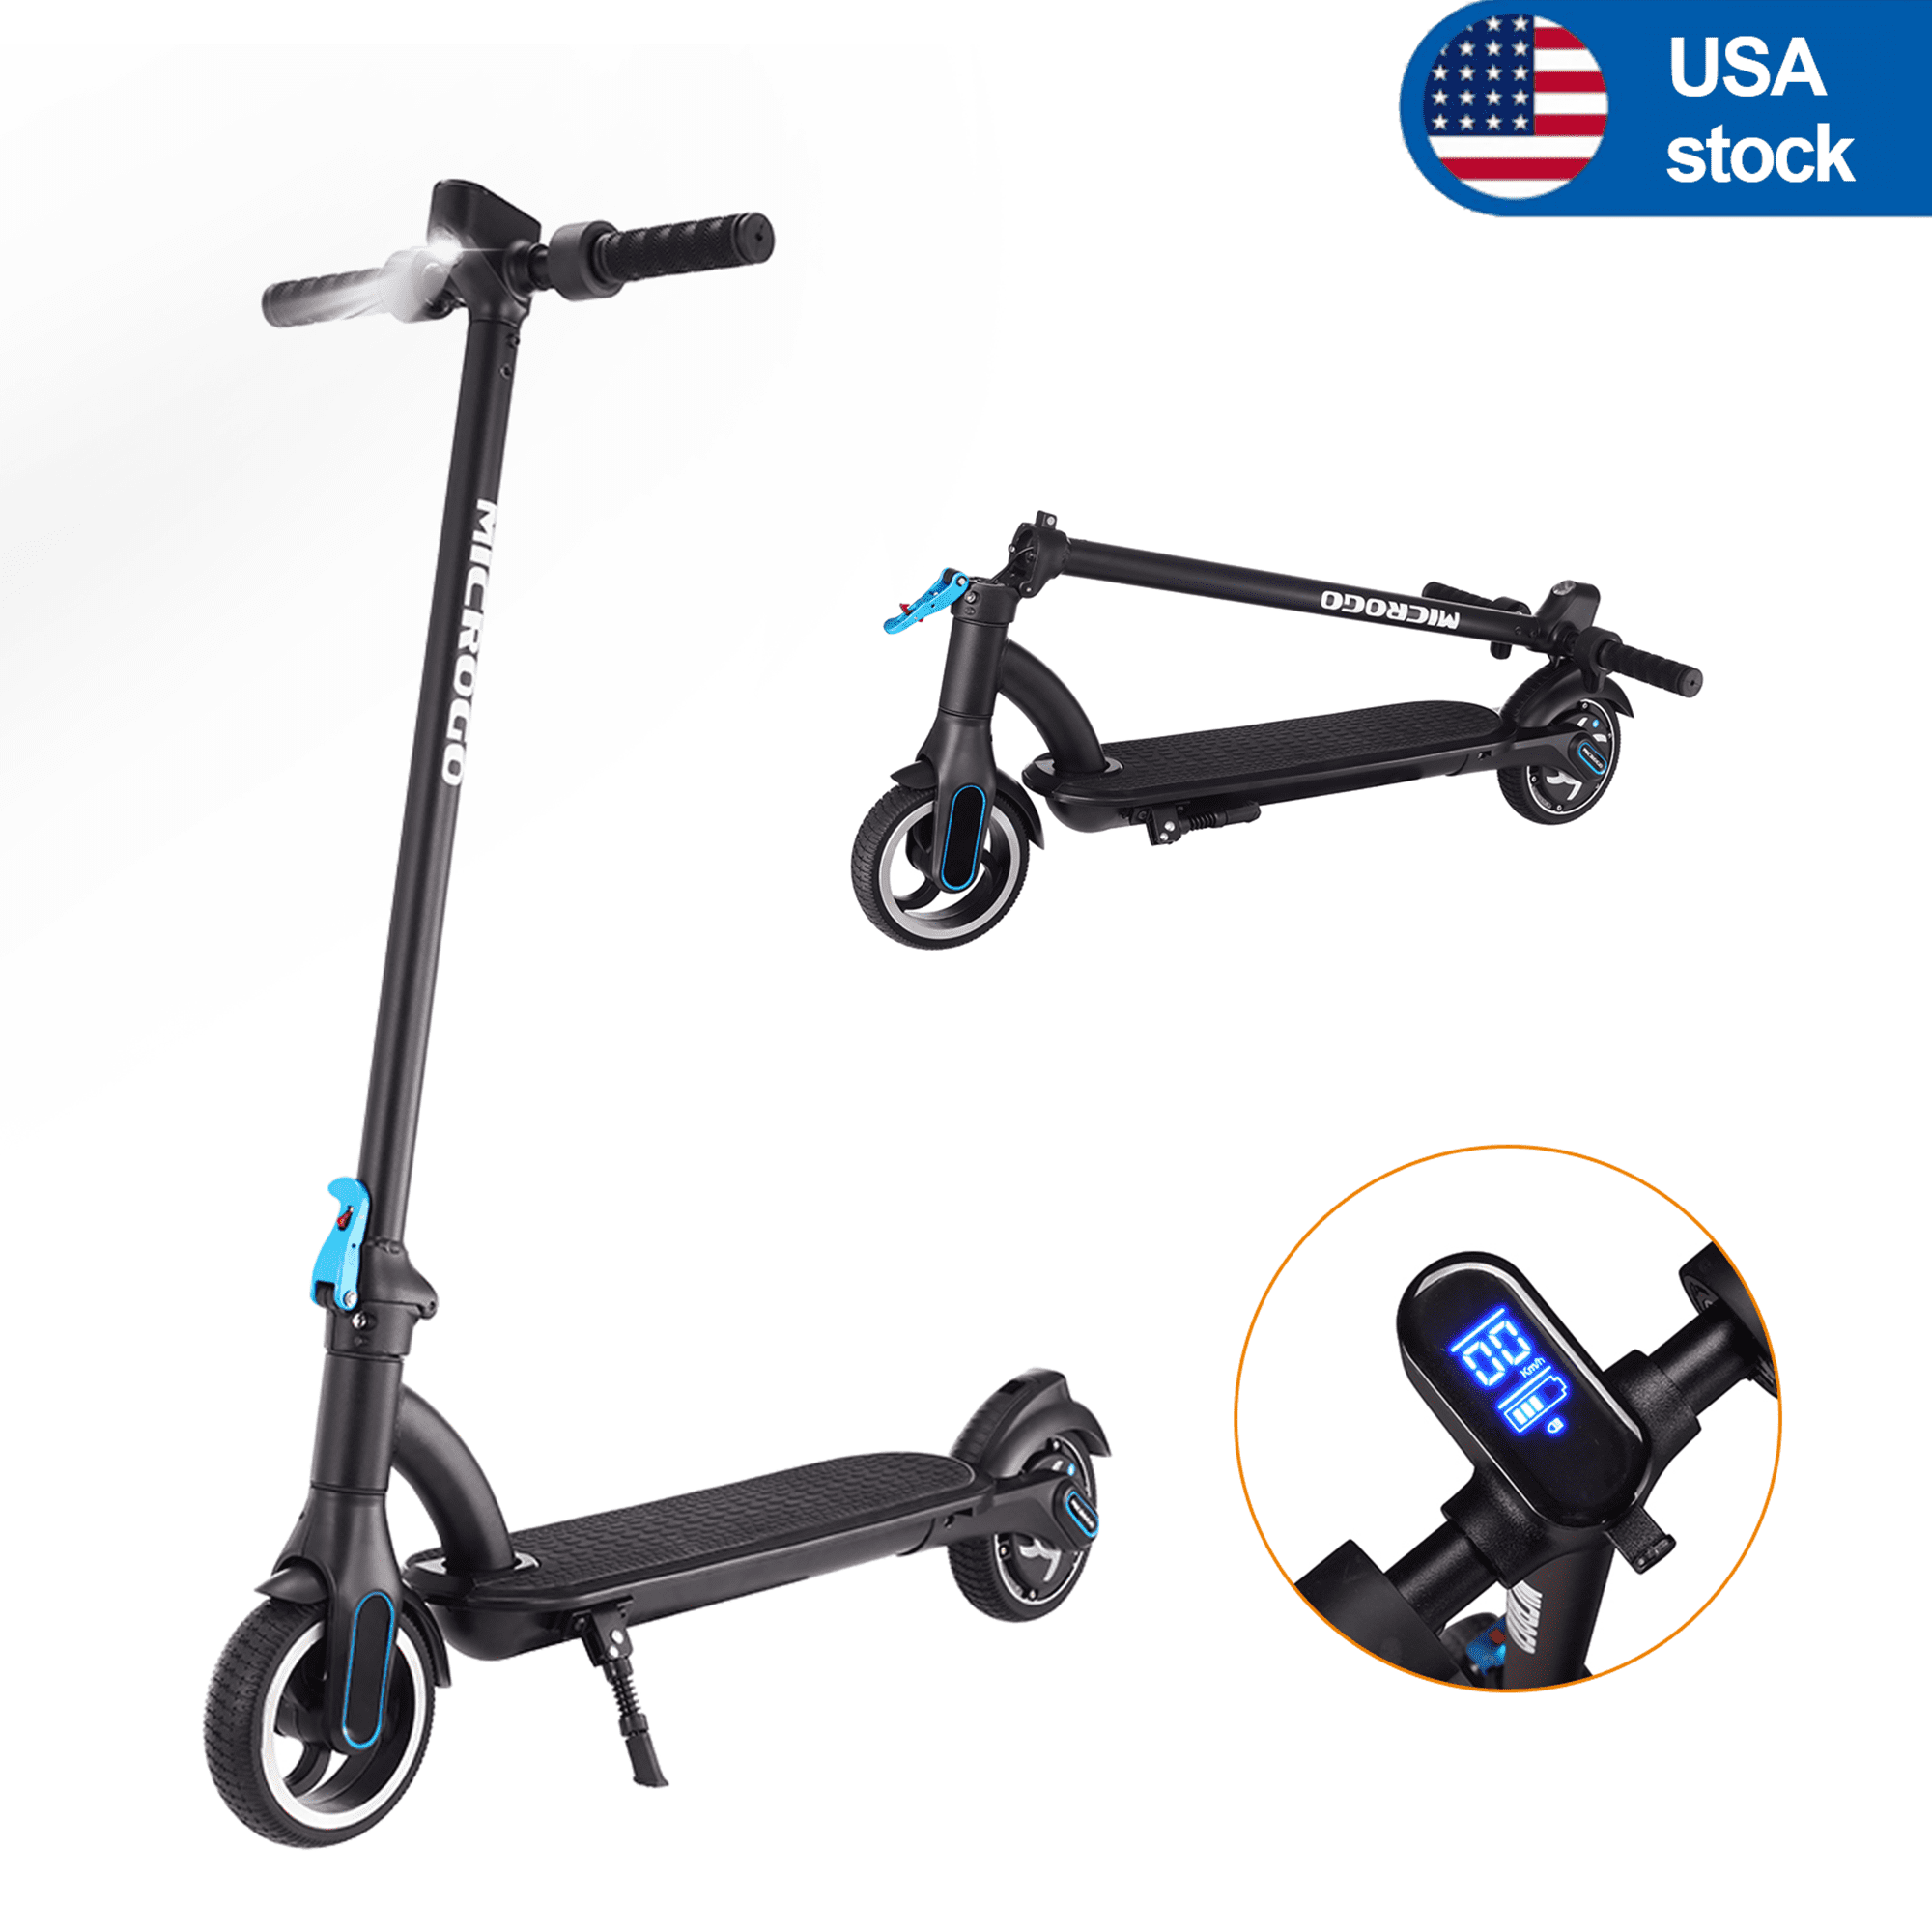 ATOYX 250W Electric Scooter 12.5 MPH Max,Lightweight Electric Scooter with LED Electronic Brake Folding Commuter Electric Scooter Teens Adults -